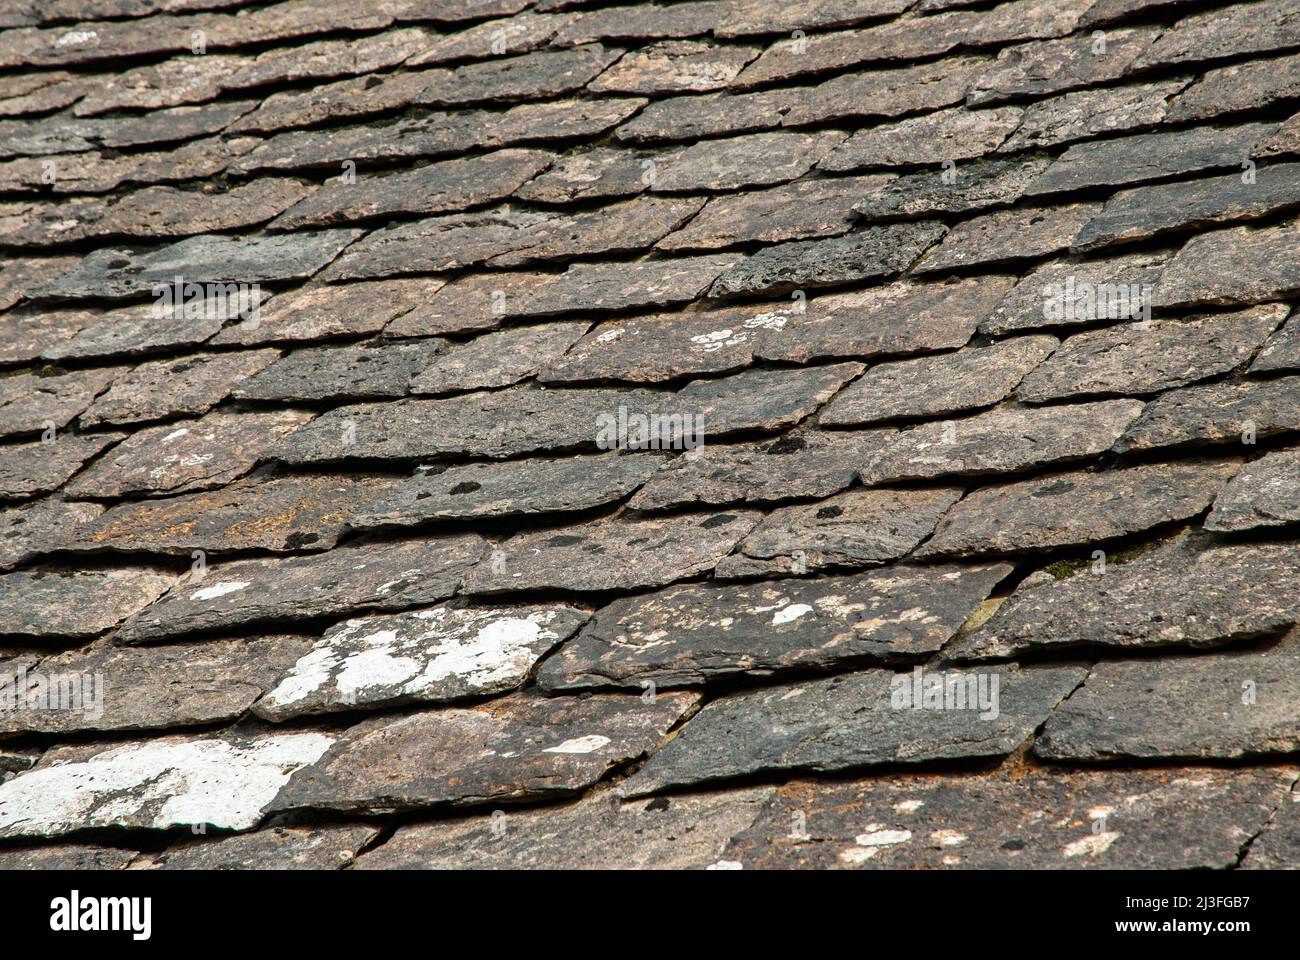 Old stone slade tiles roof closeup as stone background Stock Photo